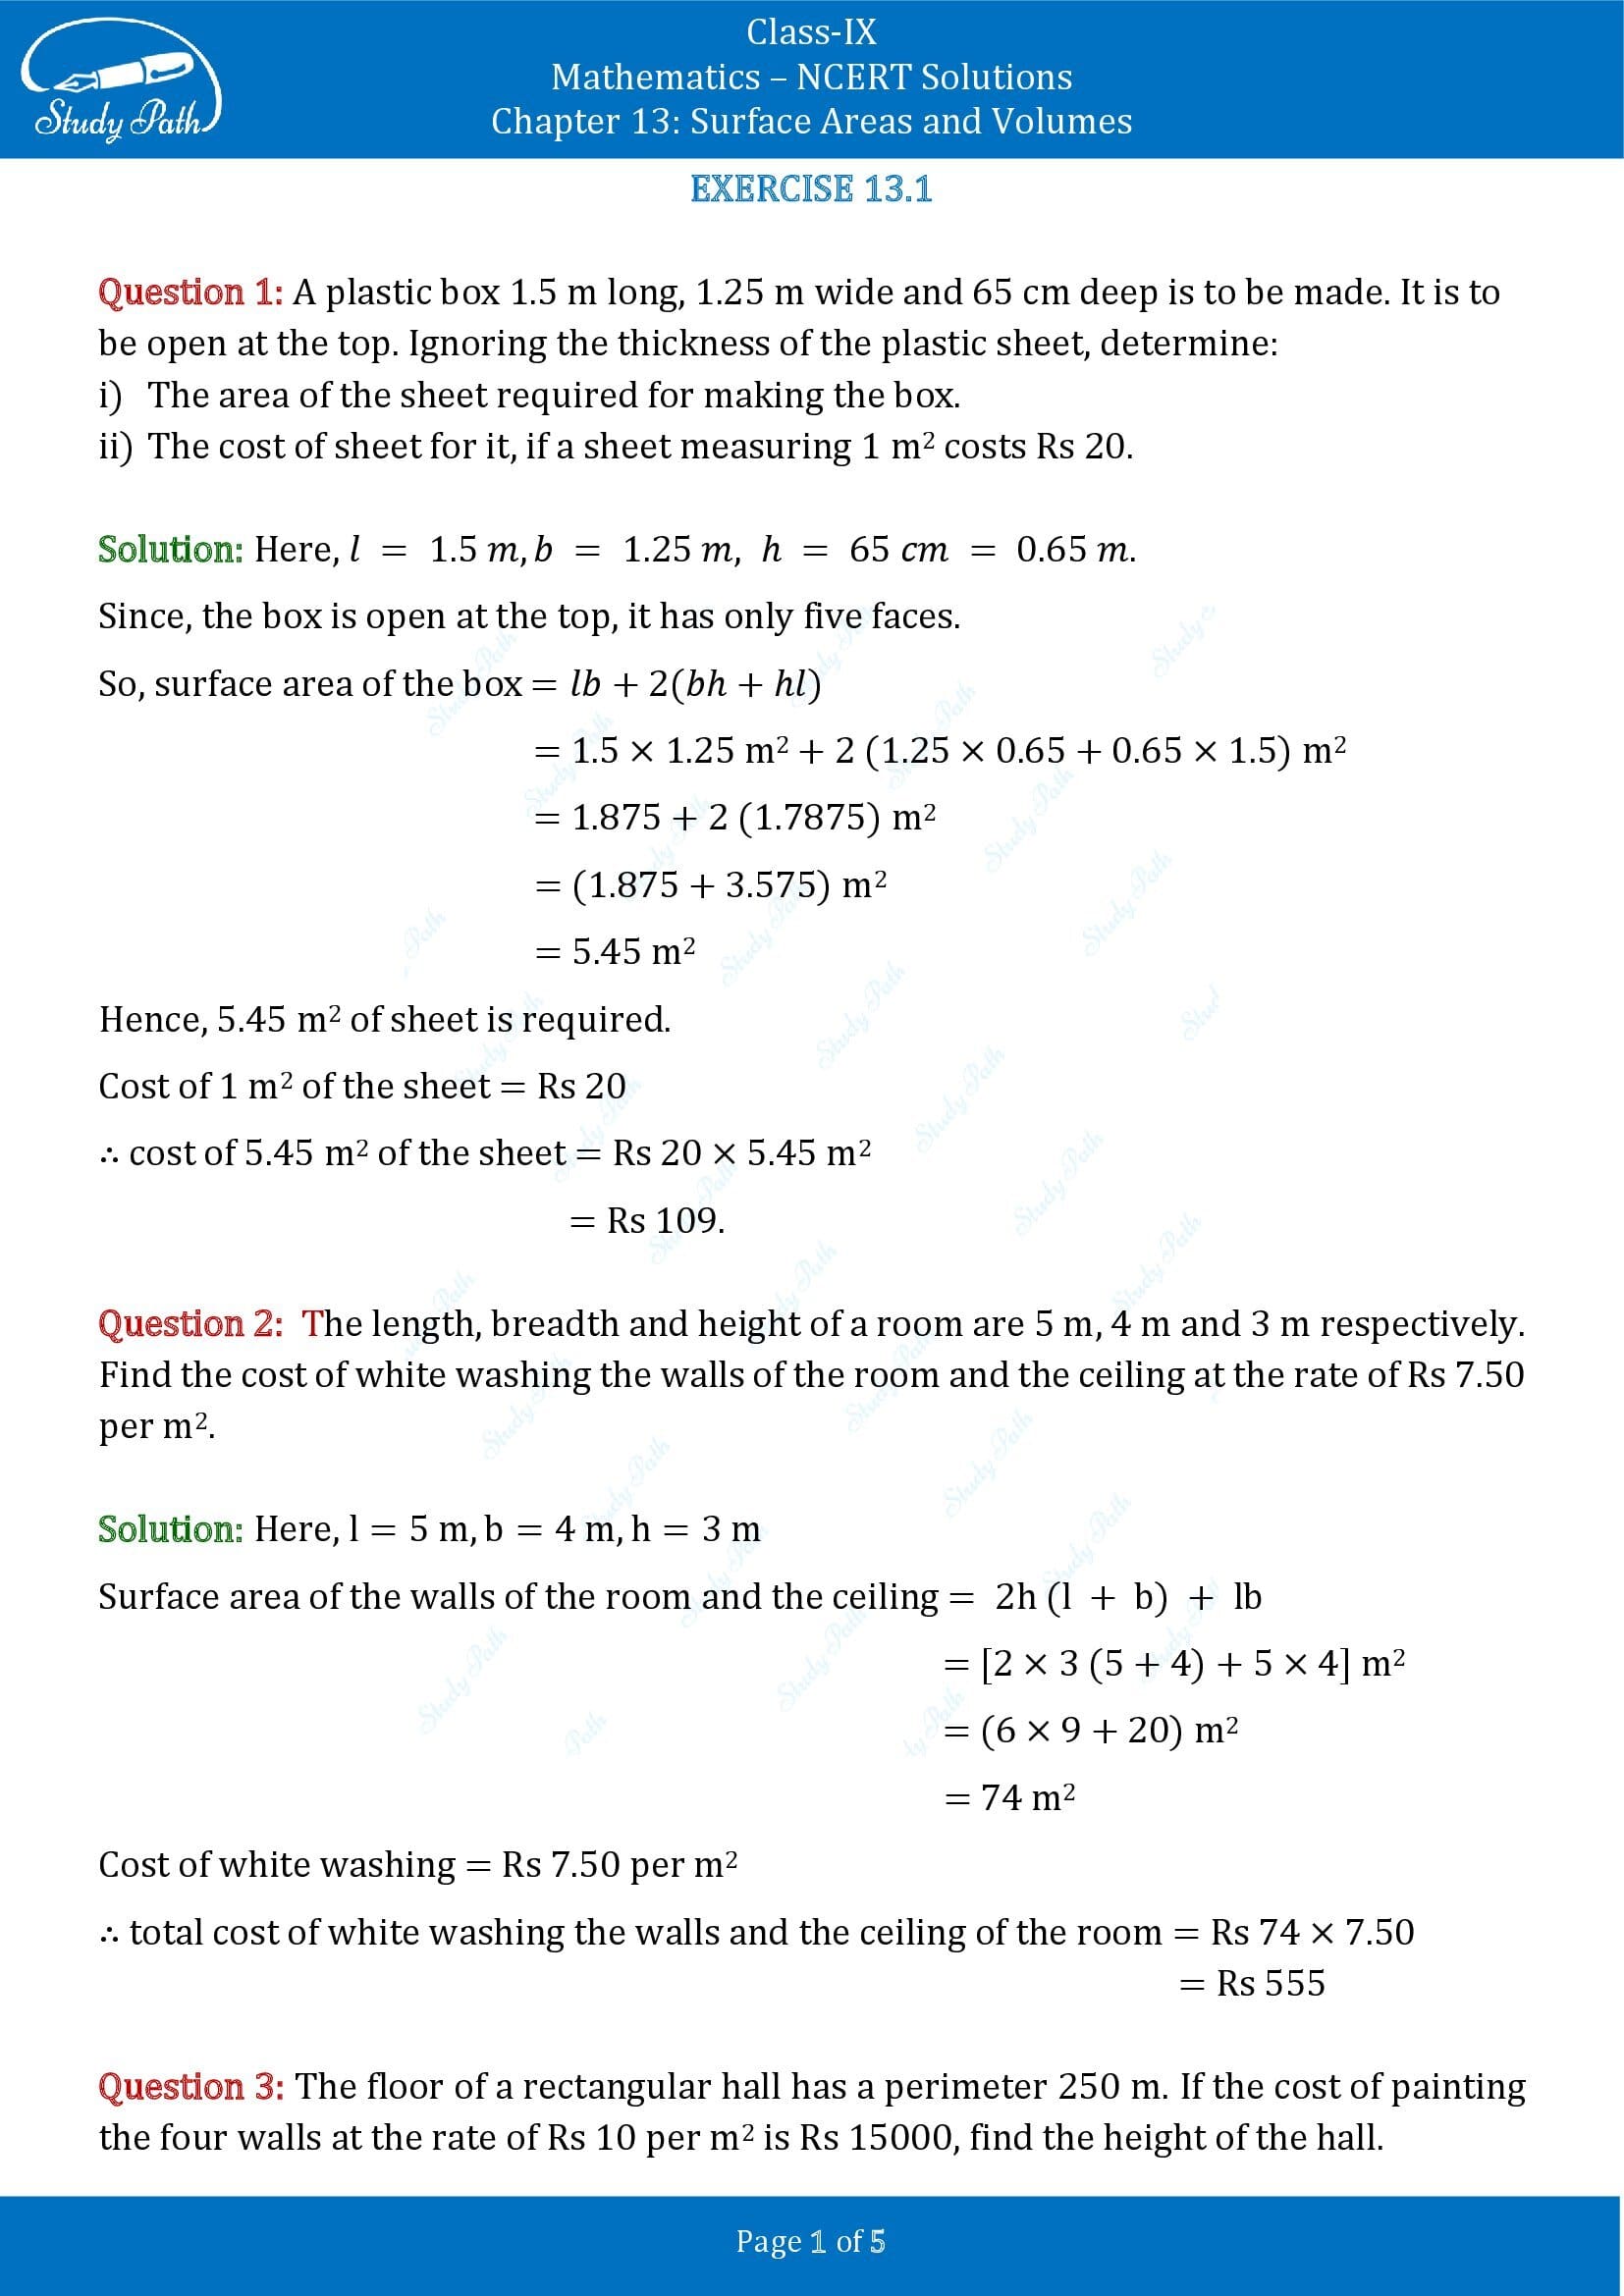 NCERT Solutions for Class 9 Maths Chapter 13 Surface Areas and Volumes Exercise 13.1 00001